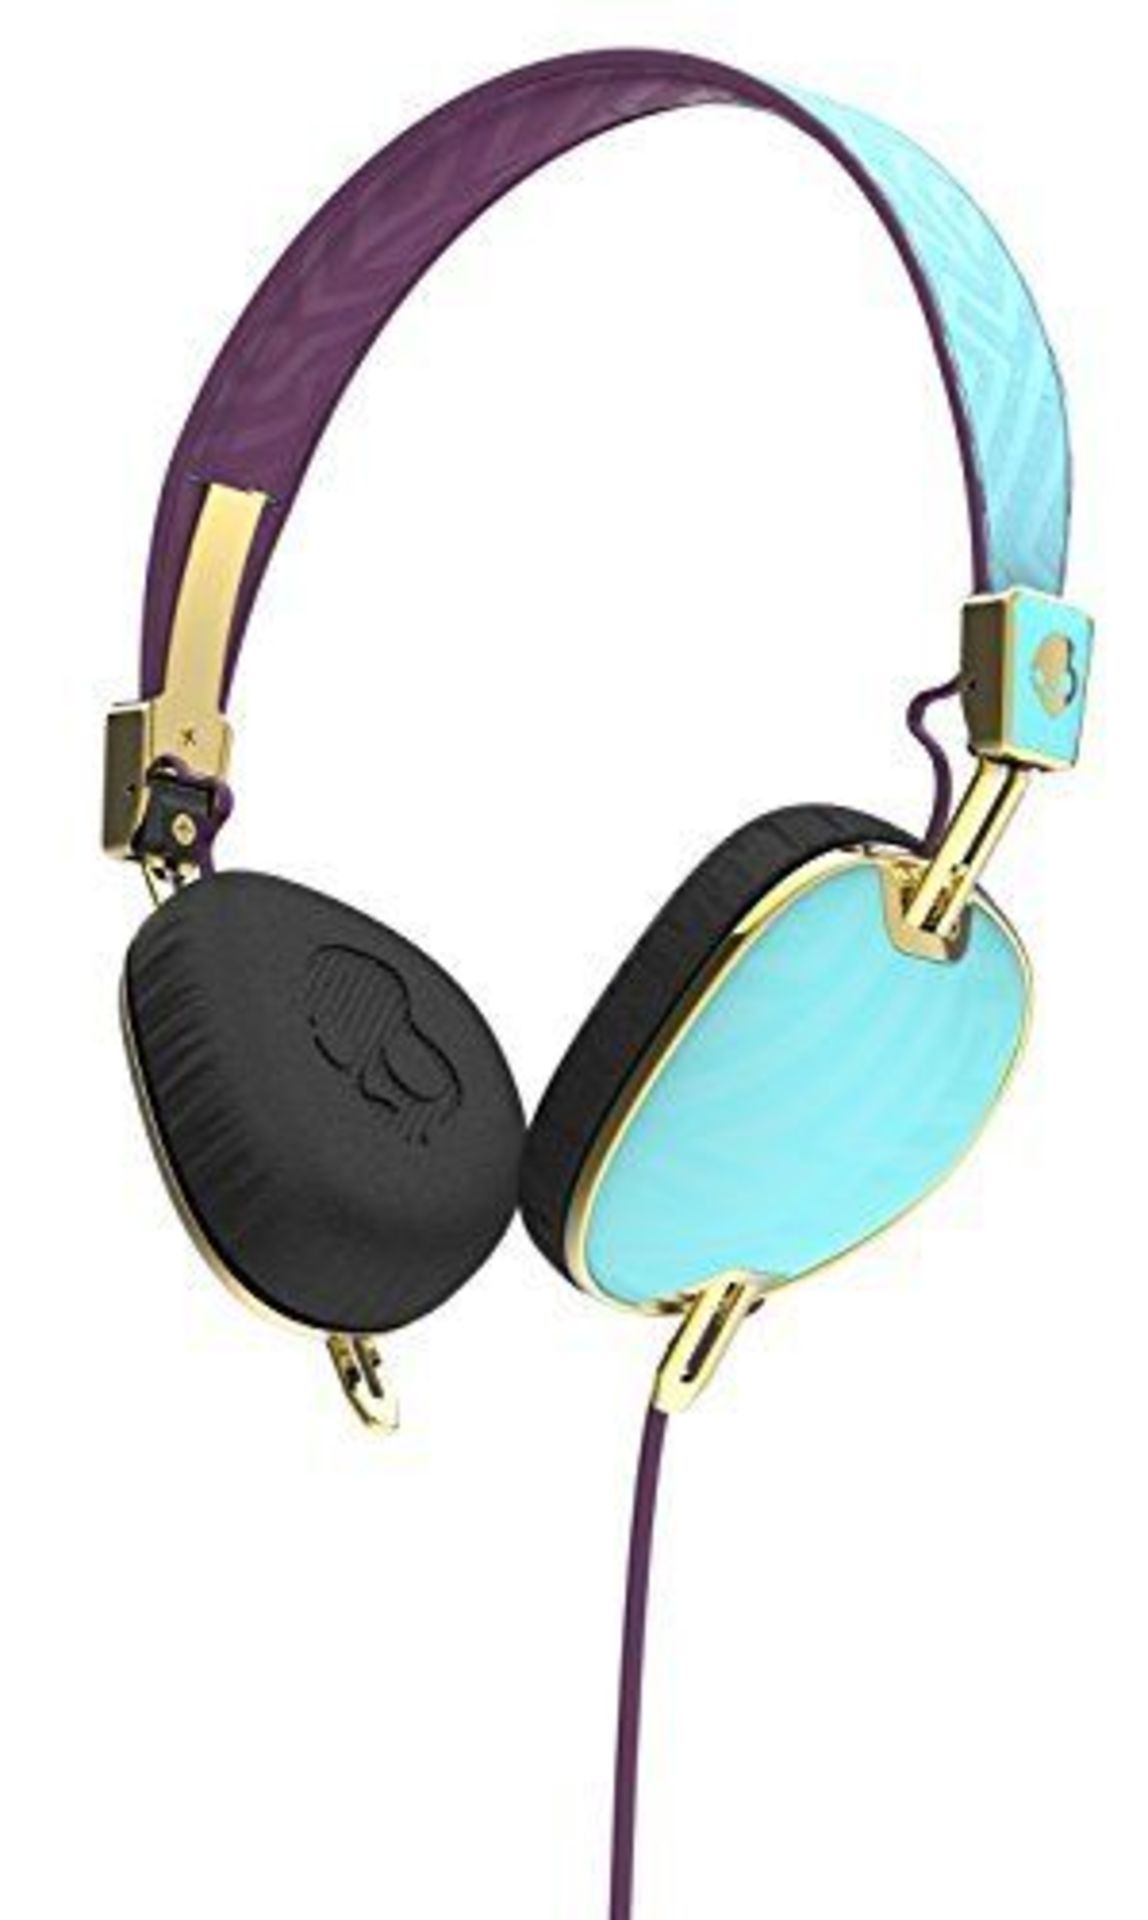 V Brand New Skullcandy Knockout On-Ear Headphones with Three Button Mic/Controller - Robin/Smoked - Image 2 of 6